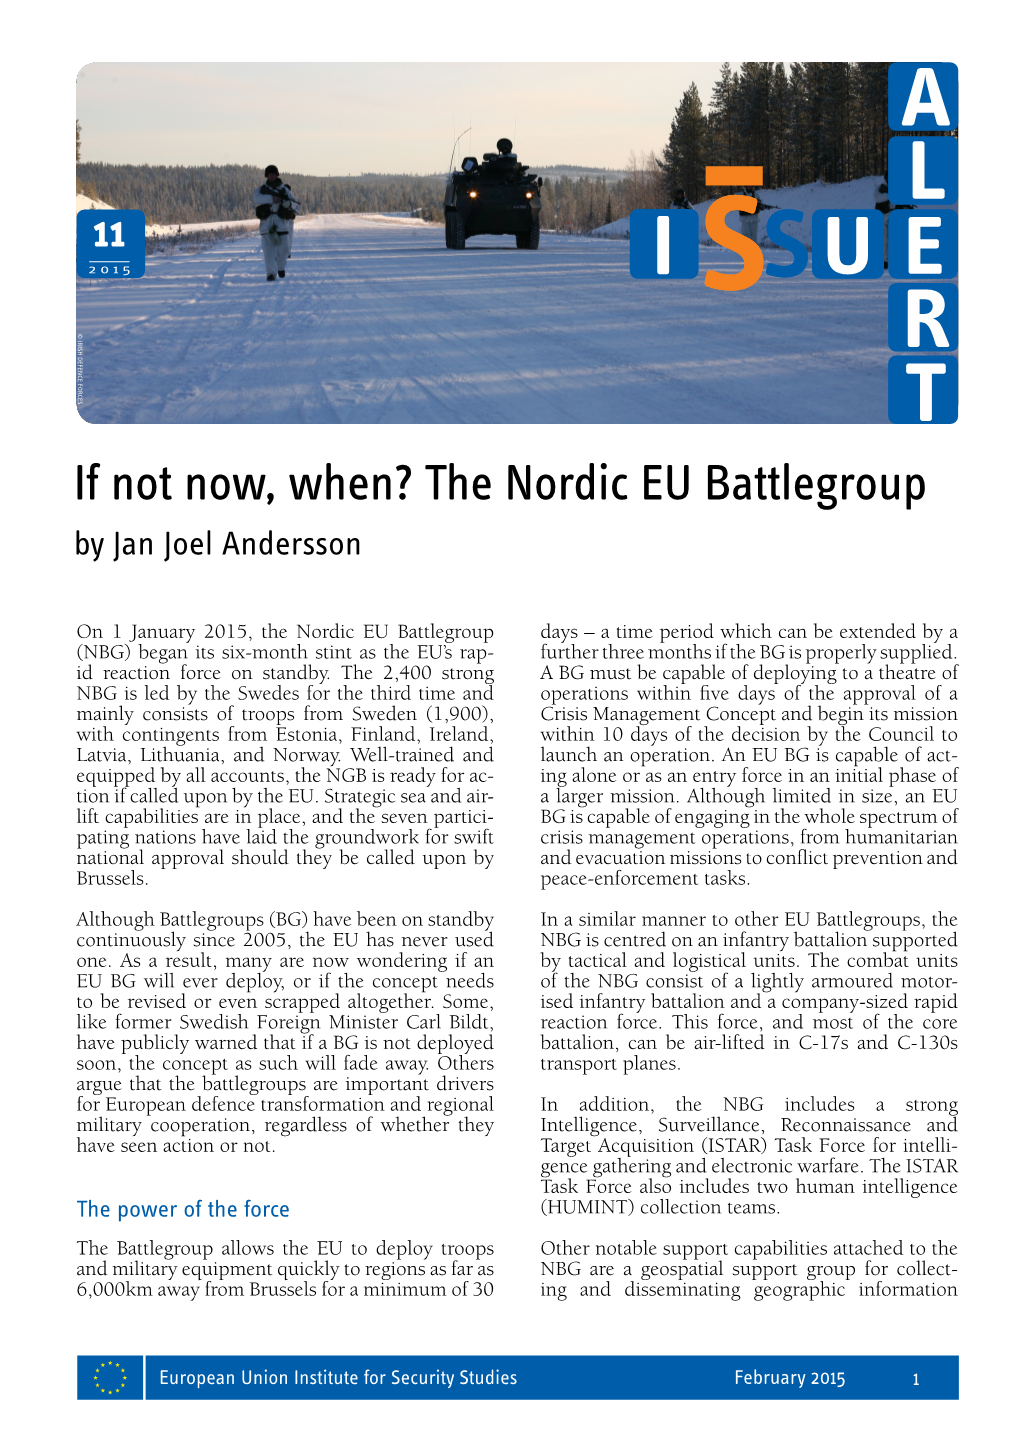 If Not Now, When? the Nordic EU Battlegroup by Jan Joel Andersson